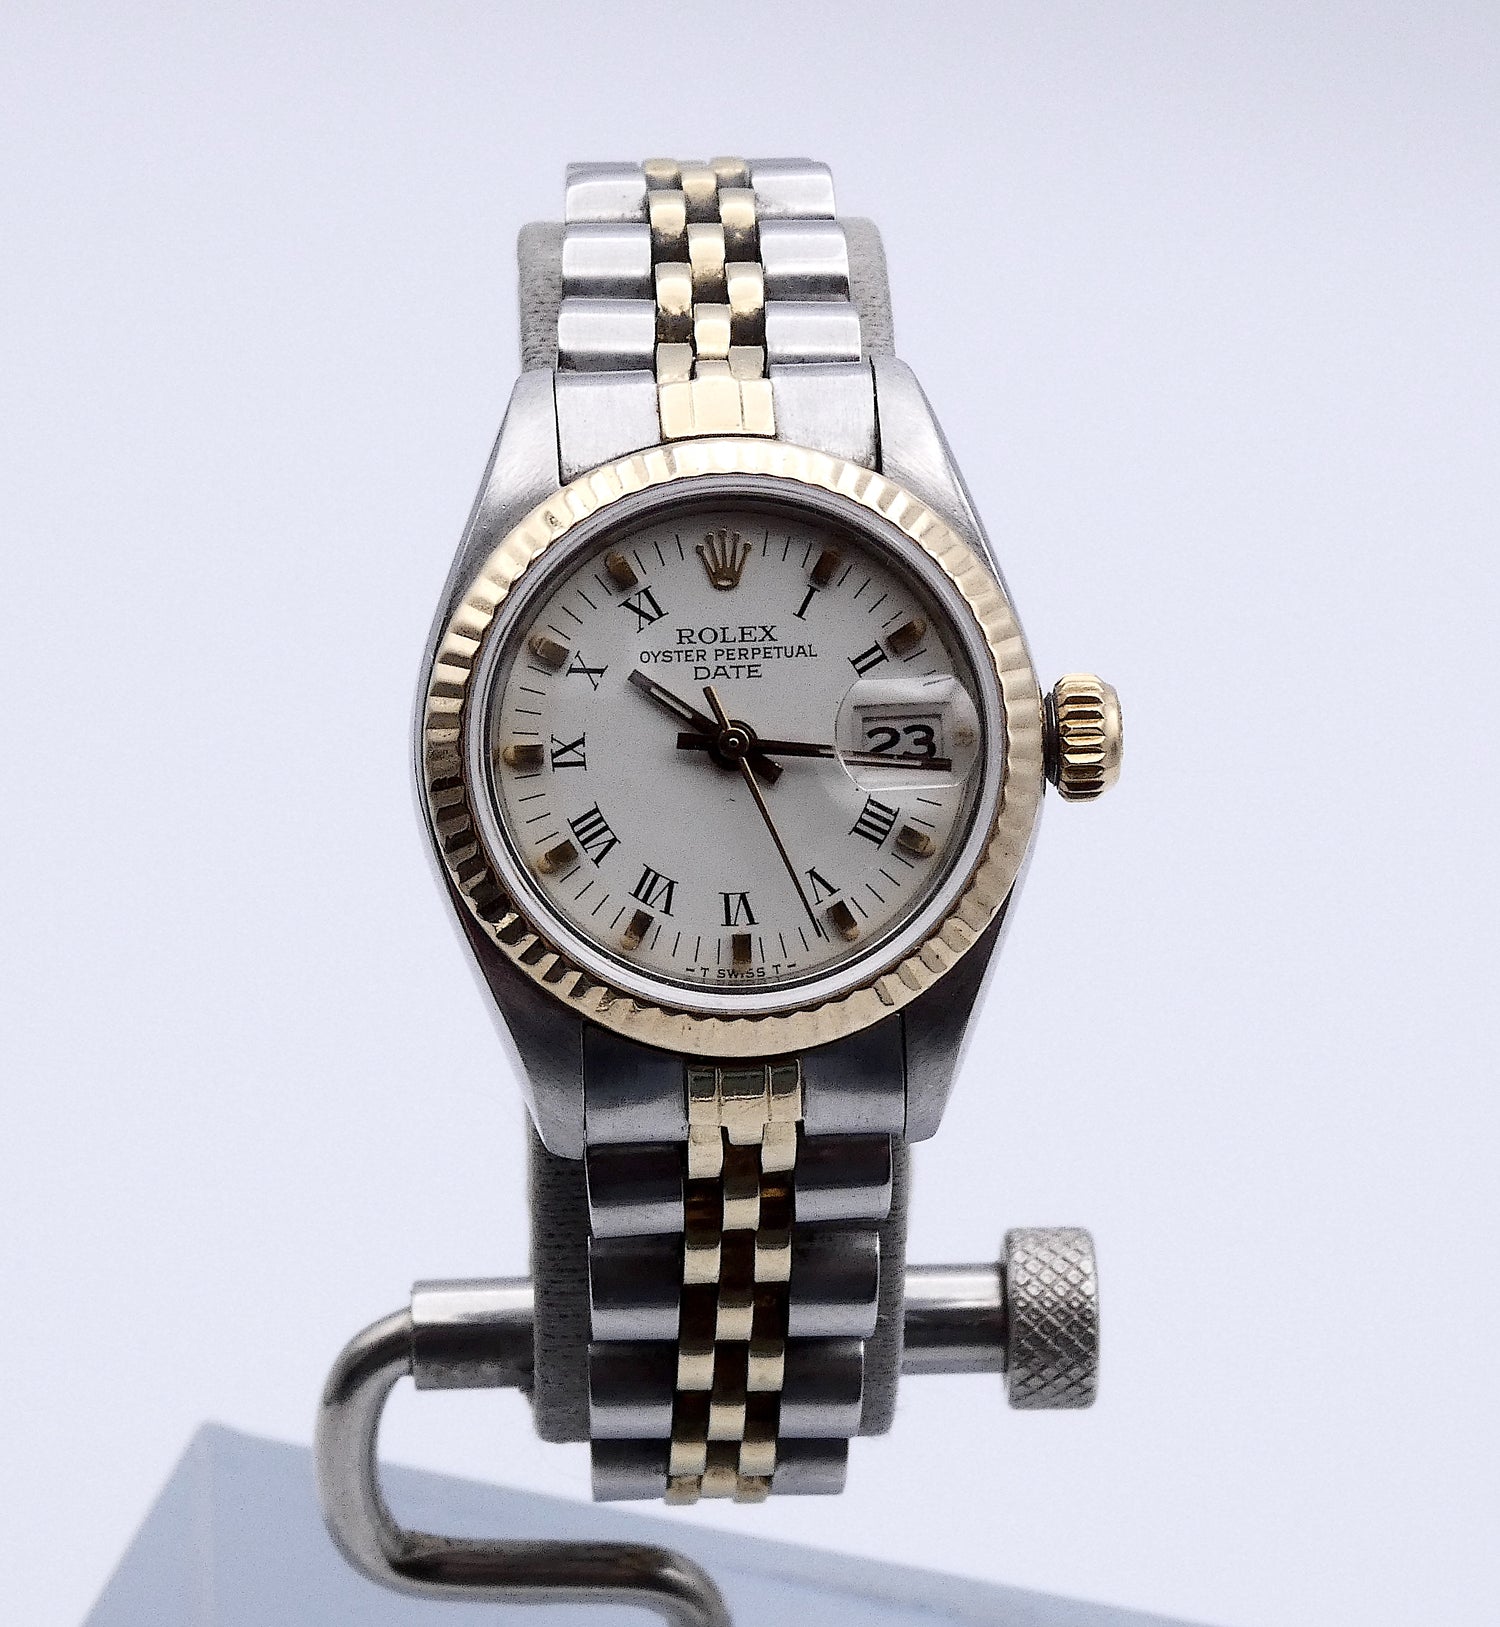 SOLD Rolex Datejust Lady 1982 / good condition